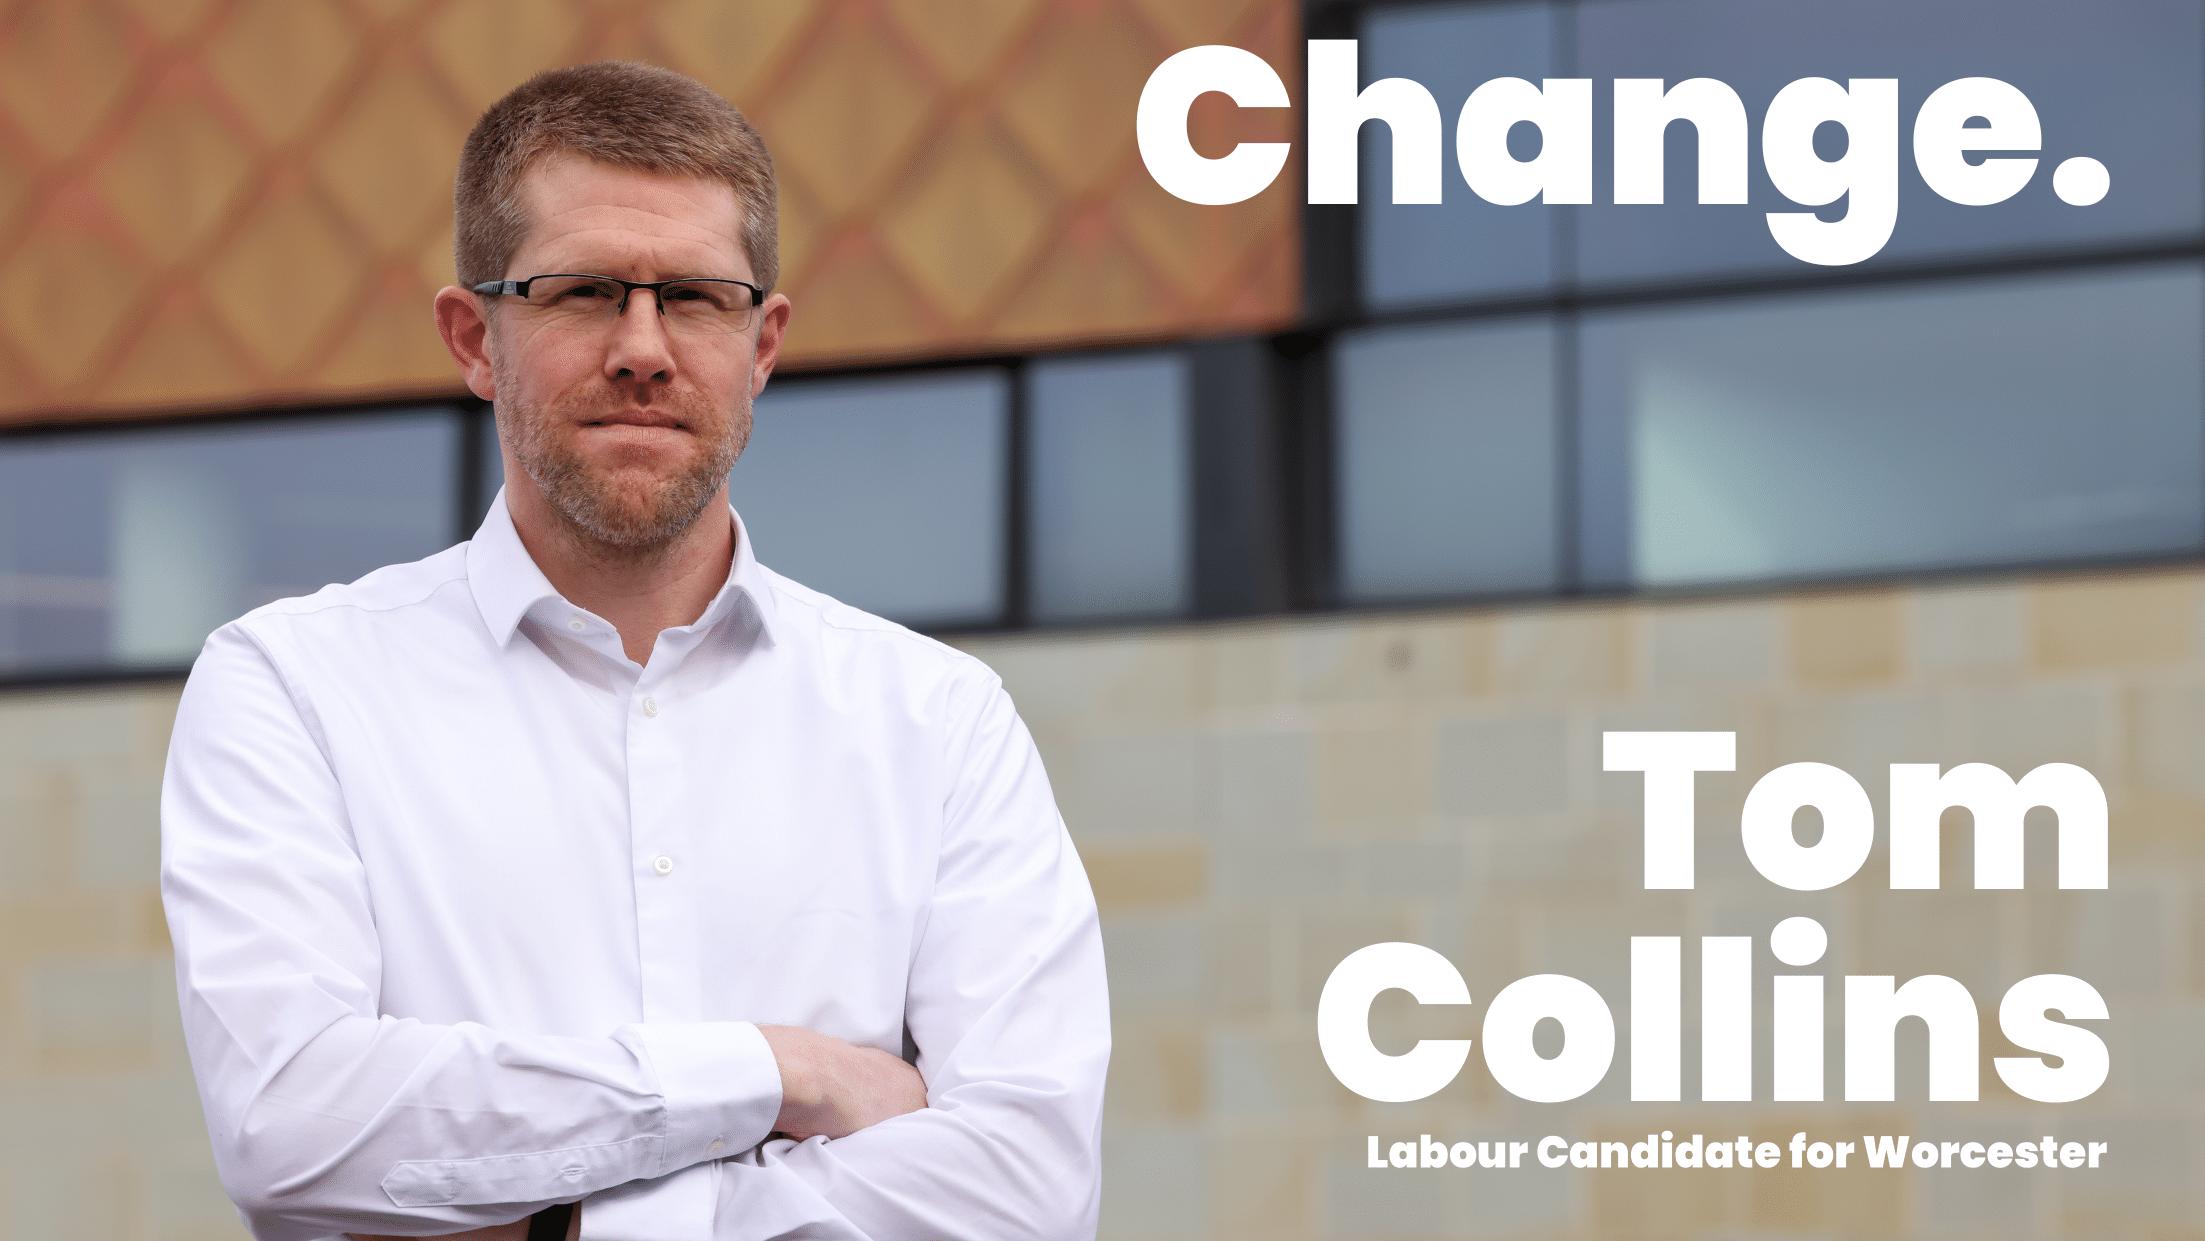 Tom Collins stood outside the Hive in Worcester. At the top right is "Change.", on the bottom left is "Tom Collins Labour Candidate for Worcester"